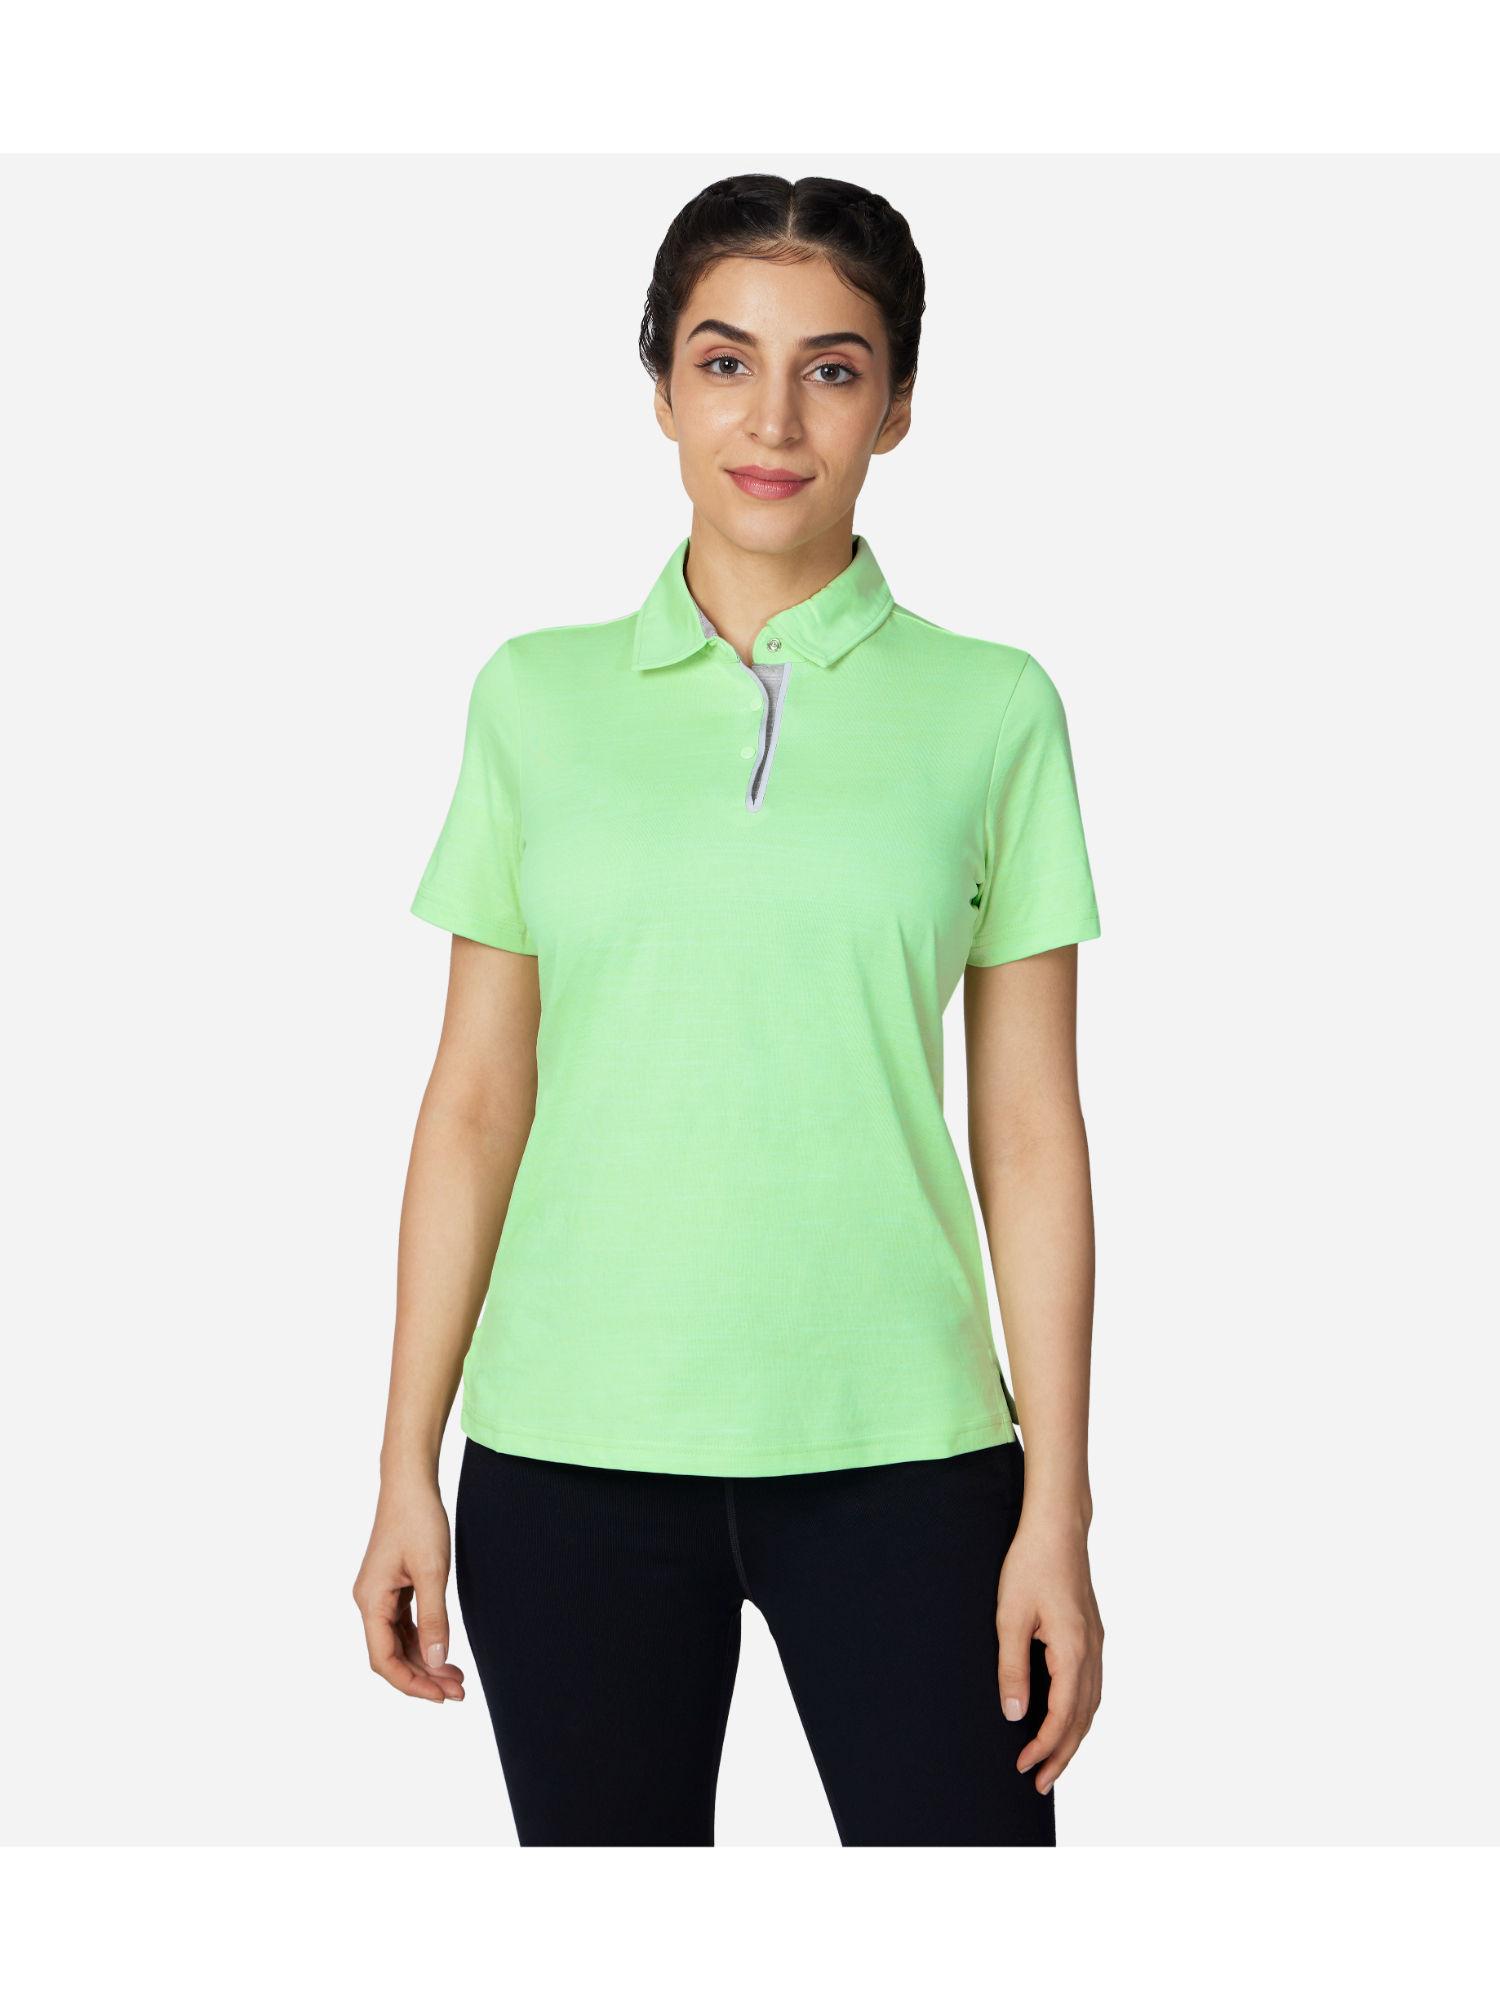 on the green polo t-shirt